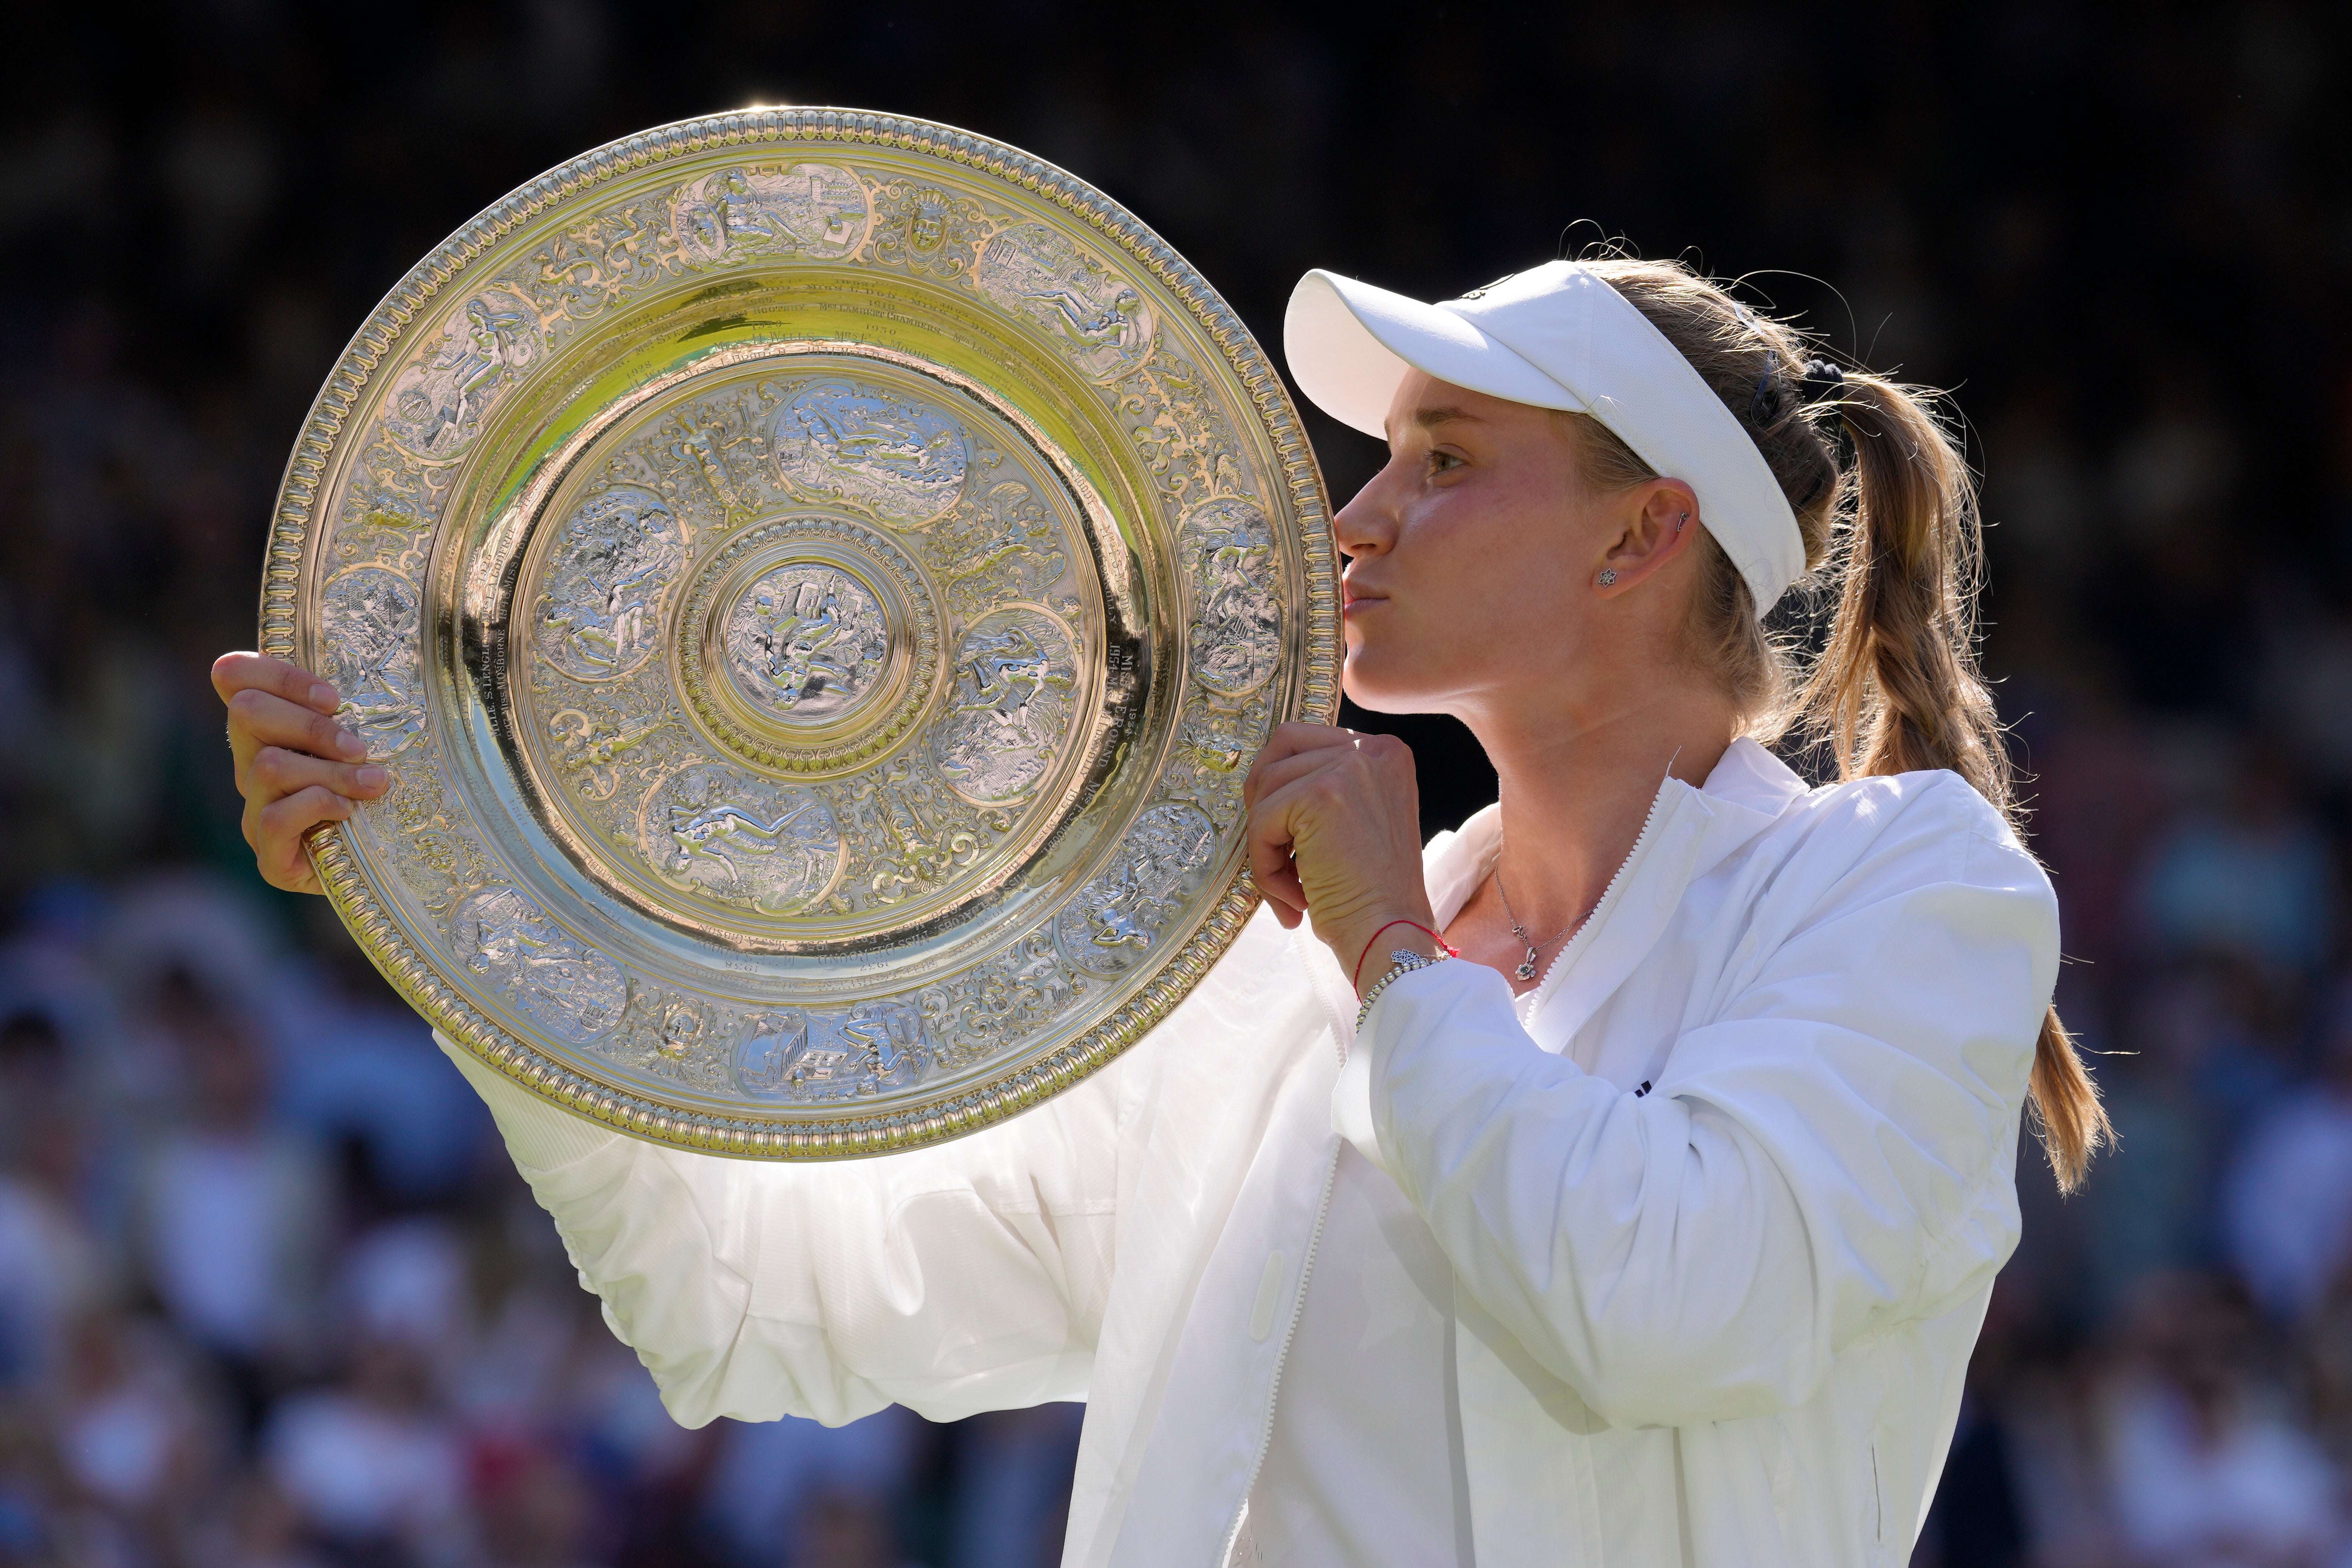 Rybakina won the Wimbledon women’s singles title in 2022 and could do so again on Saturday